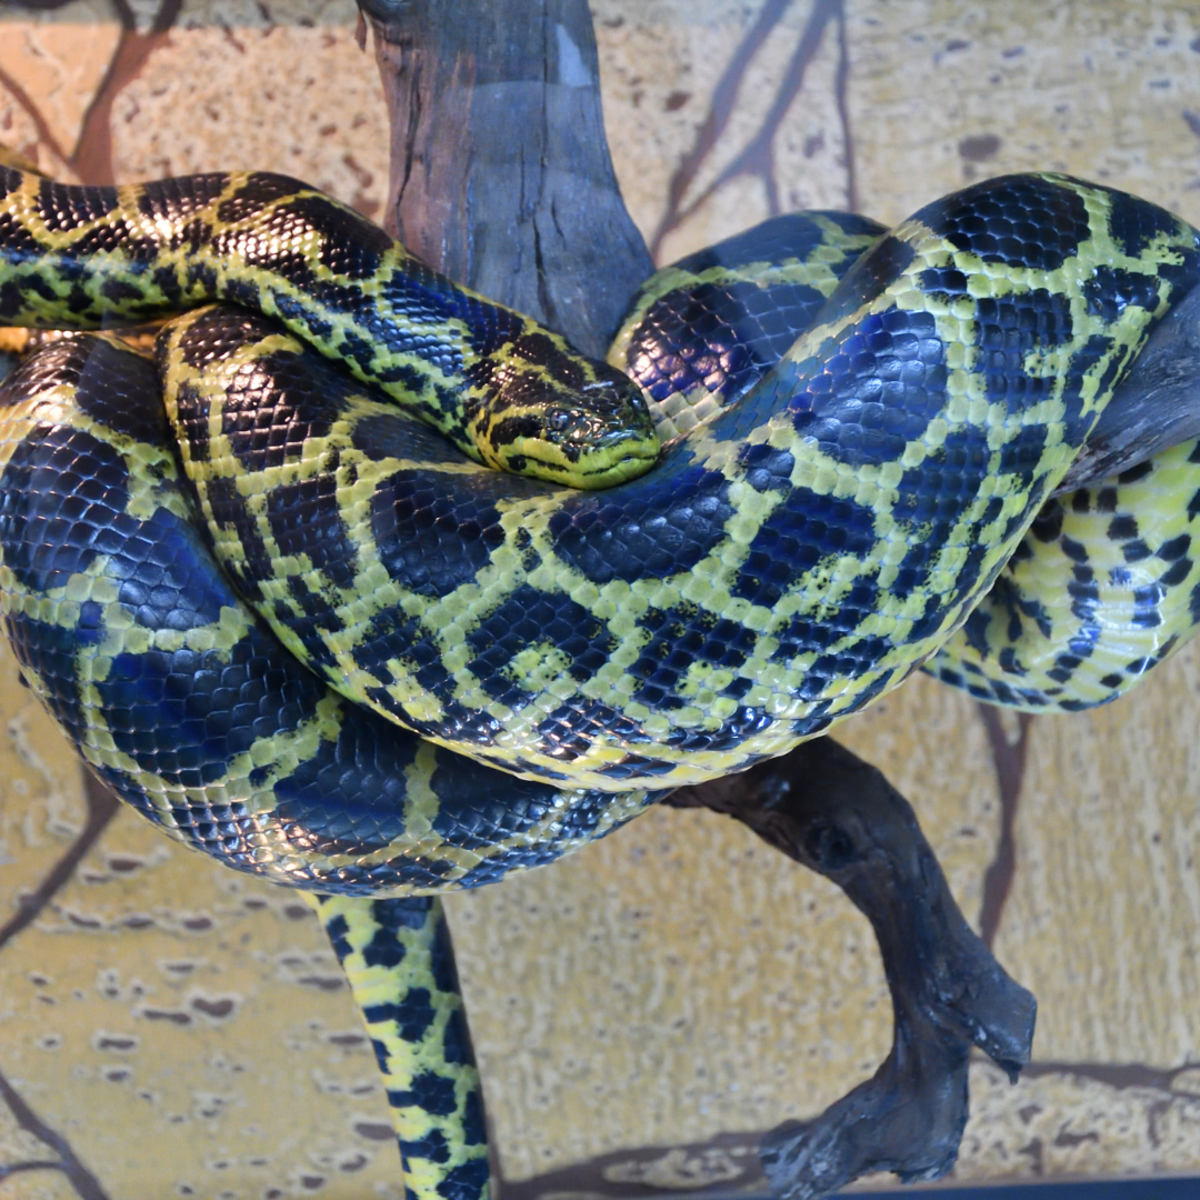 Anacondas give birth to living young, as many as 100 neonates at a time.